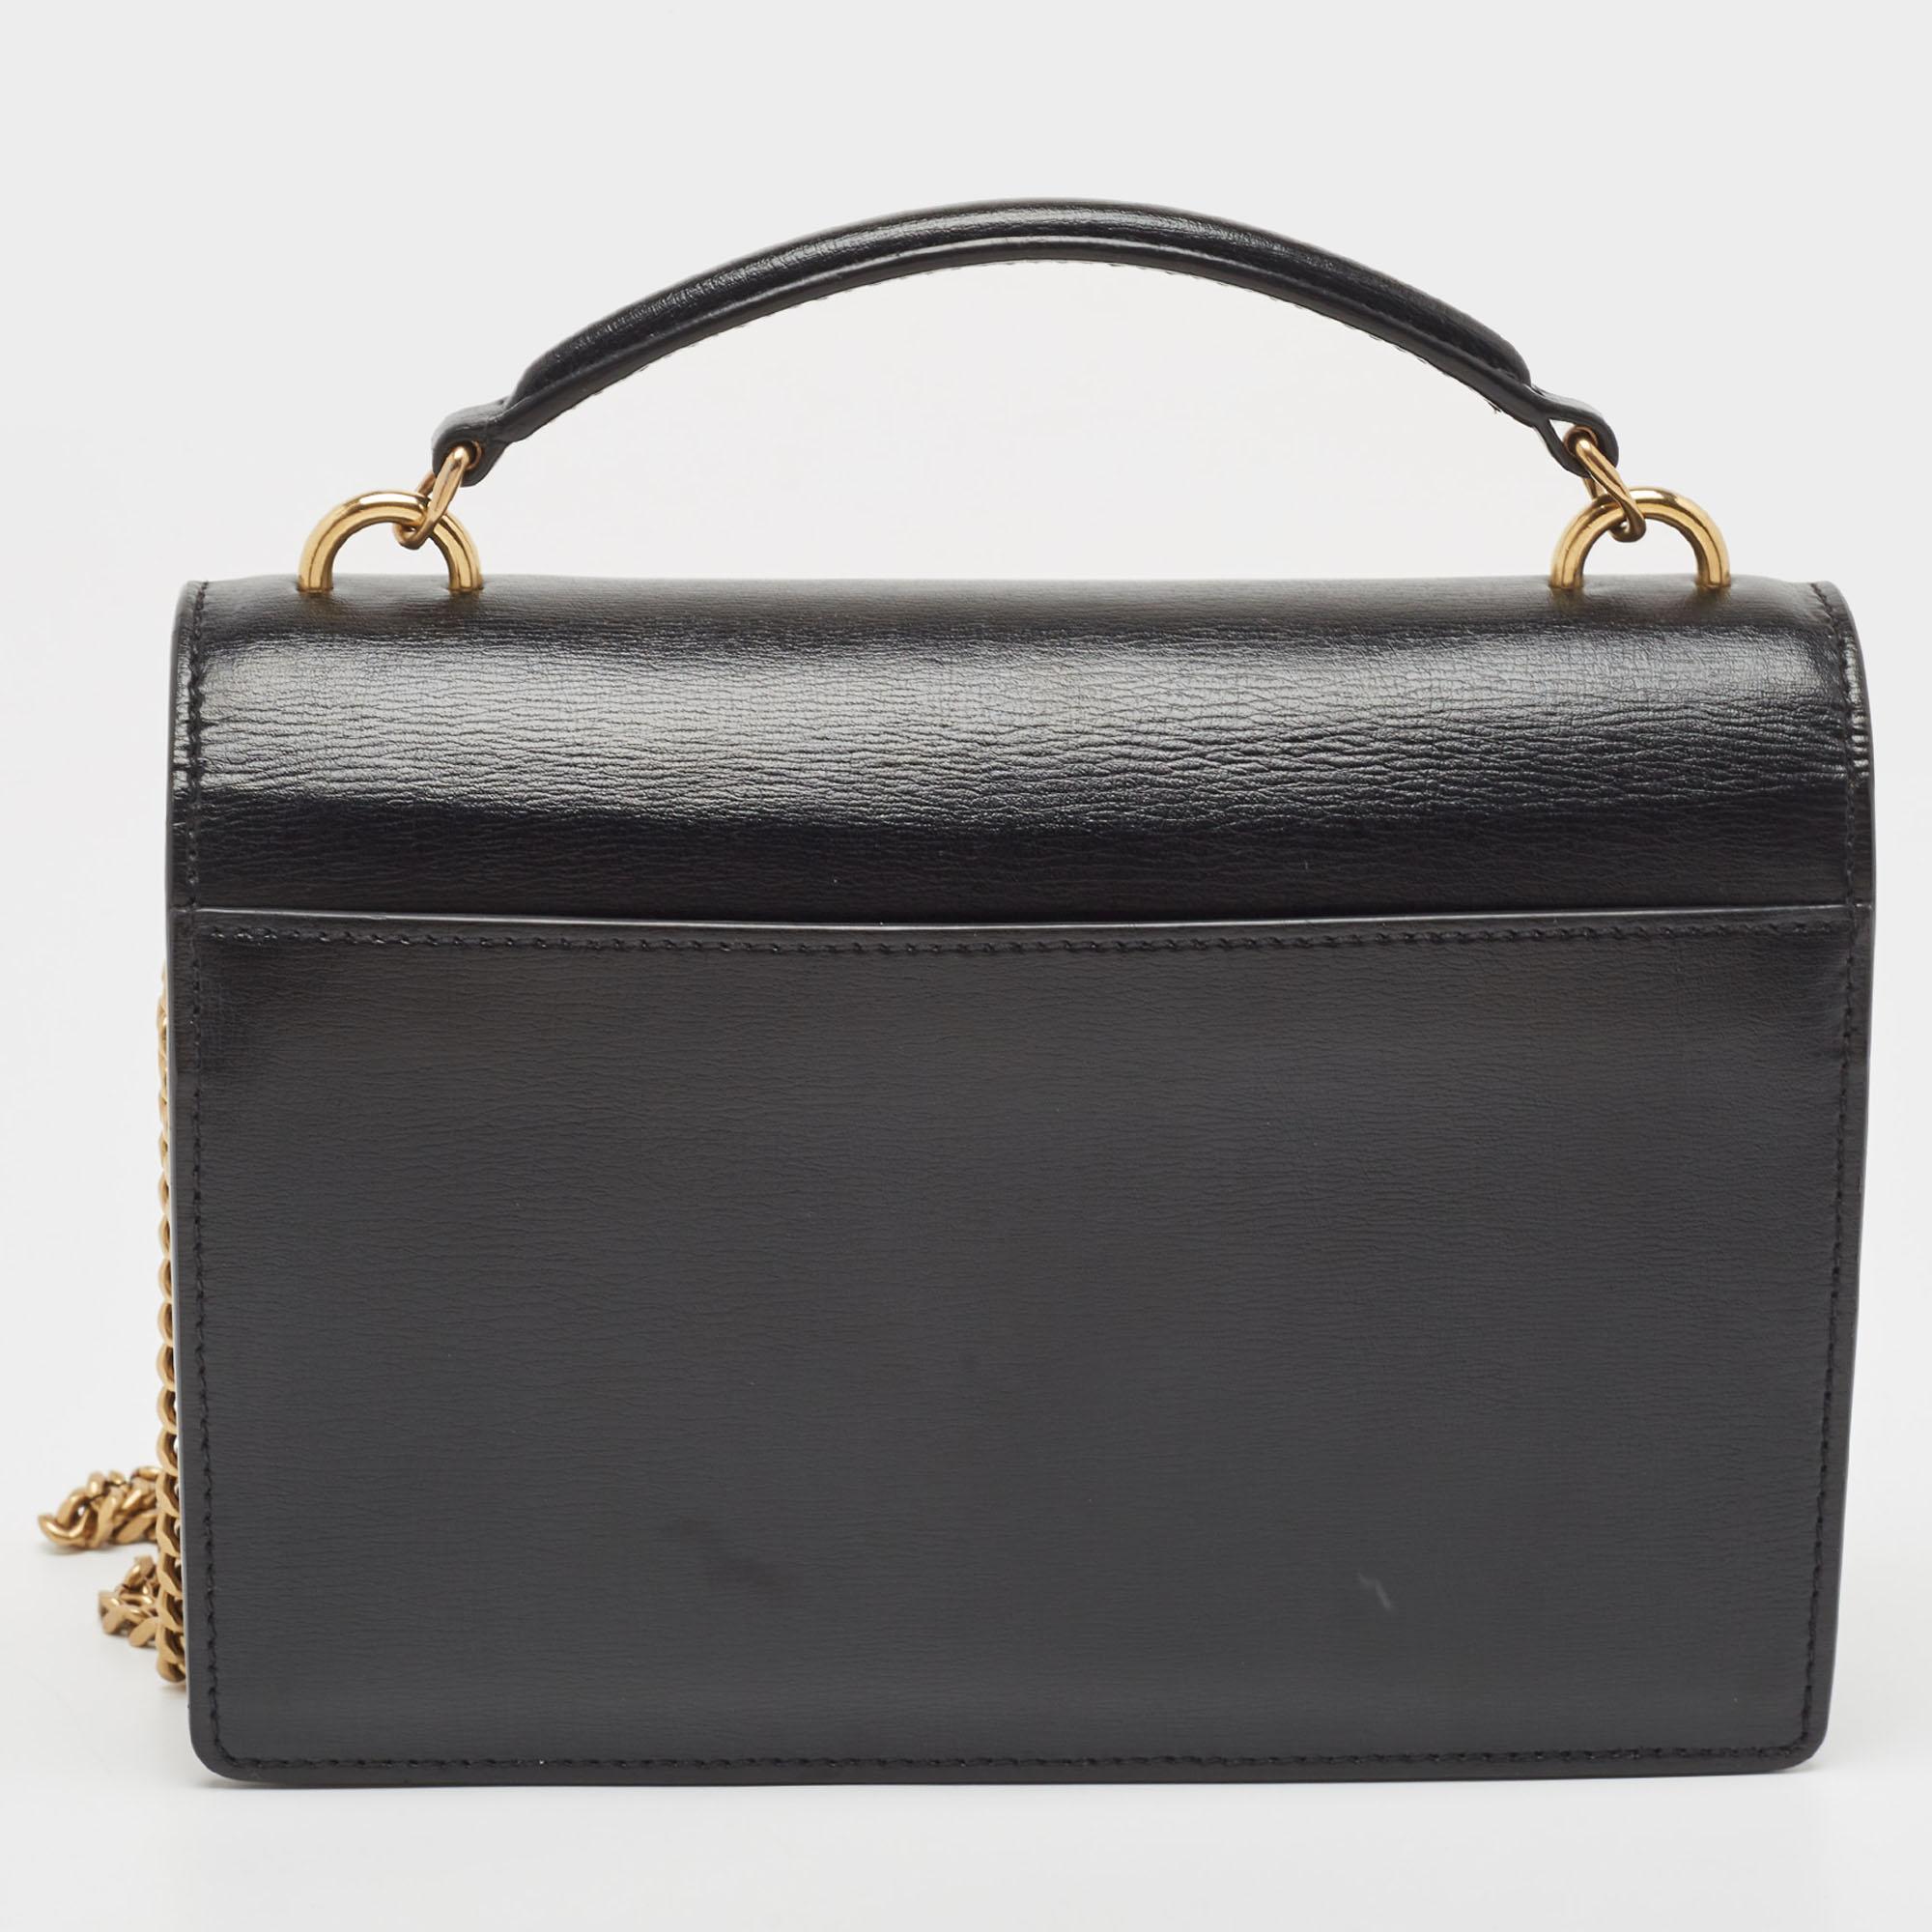 Express your personal style with this high-end crossbody bag. Crafted from quality materials, it has been added with fine details and is finished perfectly. It features a well-sized interior.

Includes: Original Dustbag, Detachable Strap

